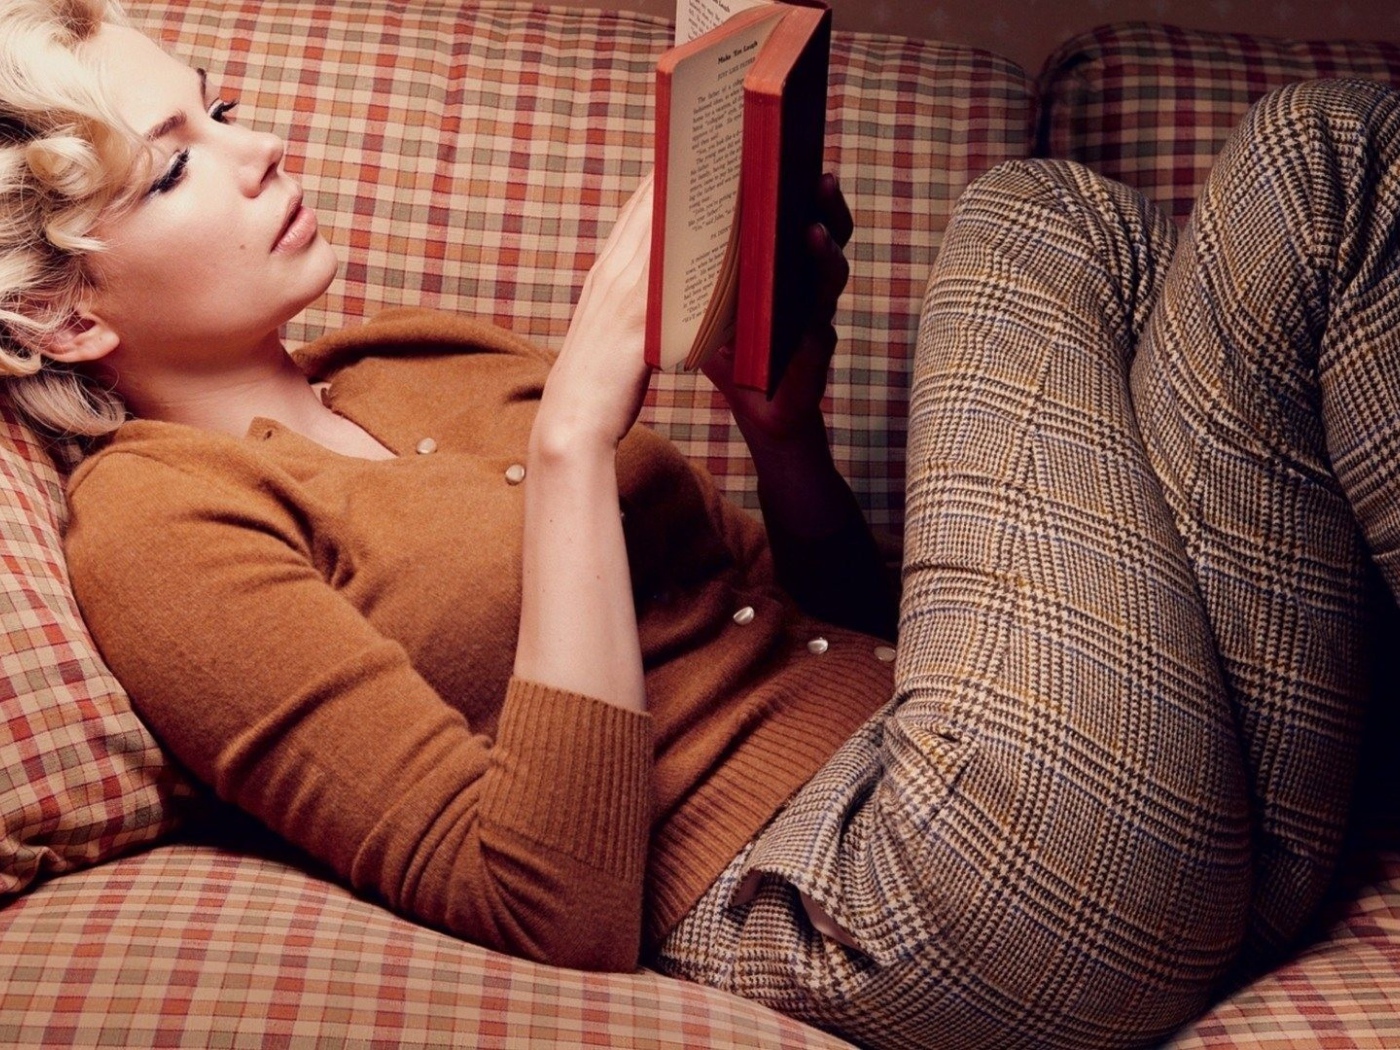 Girl reading a book lying on the couch